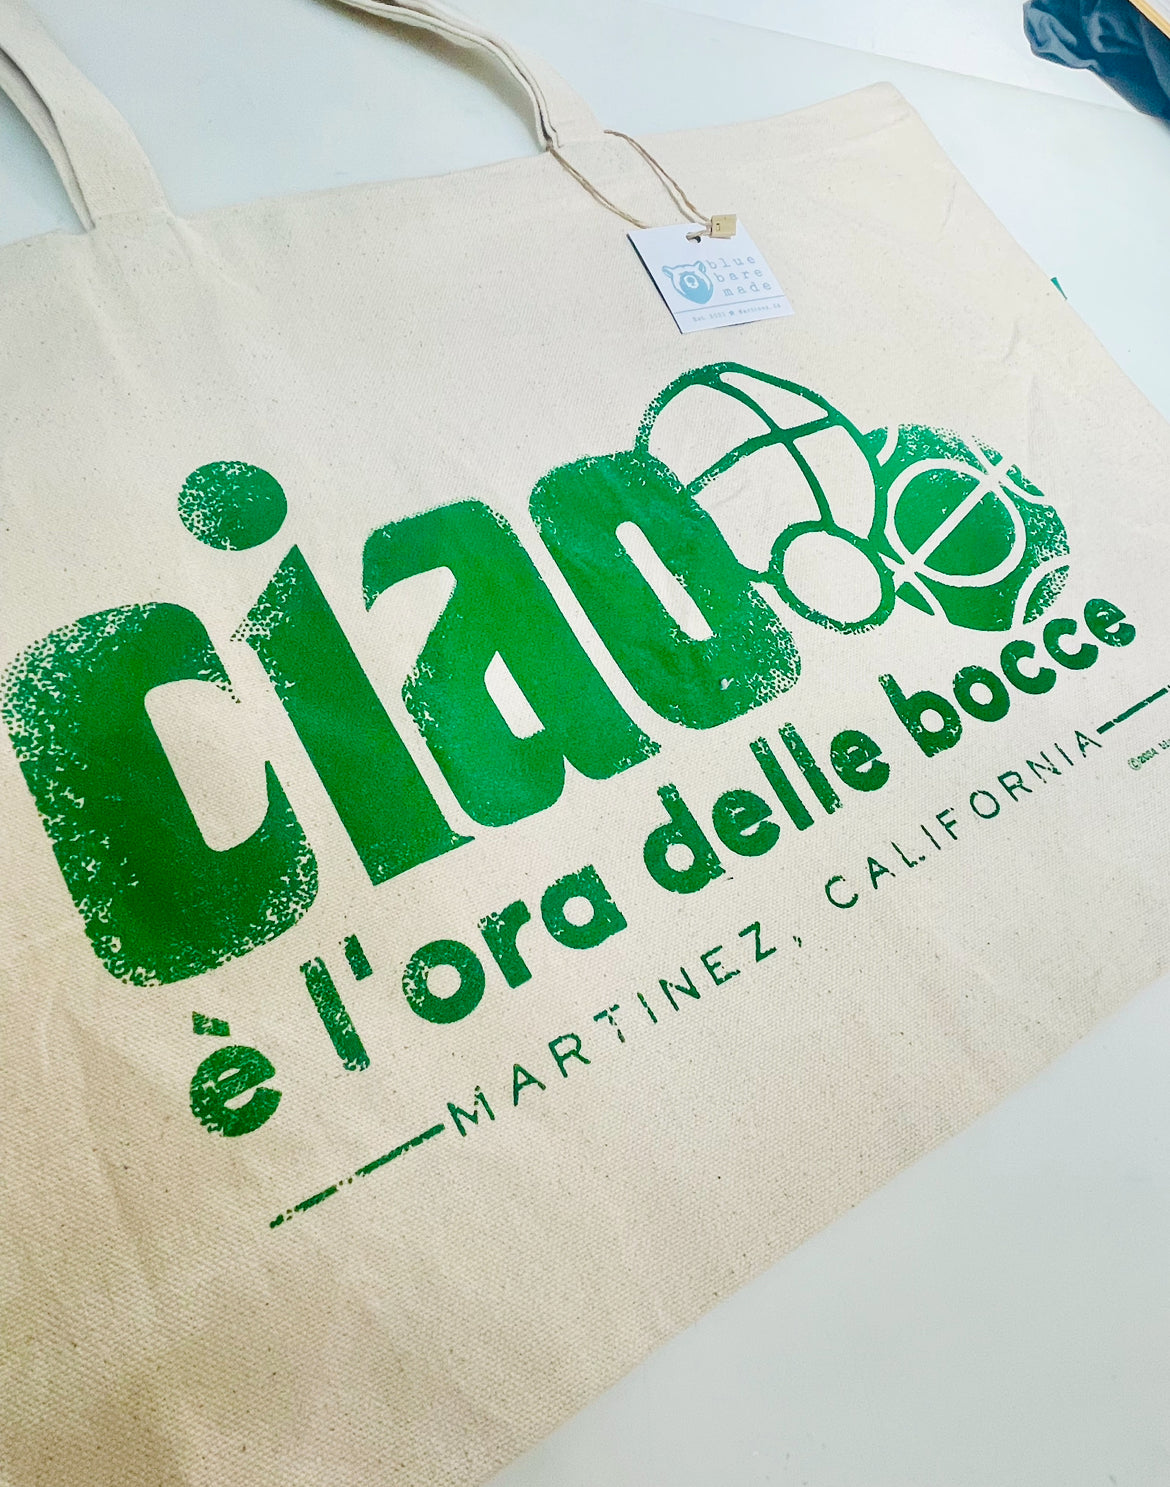 Large Tote Bag | Ciao, it's time for bocce